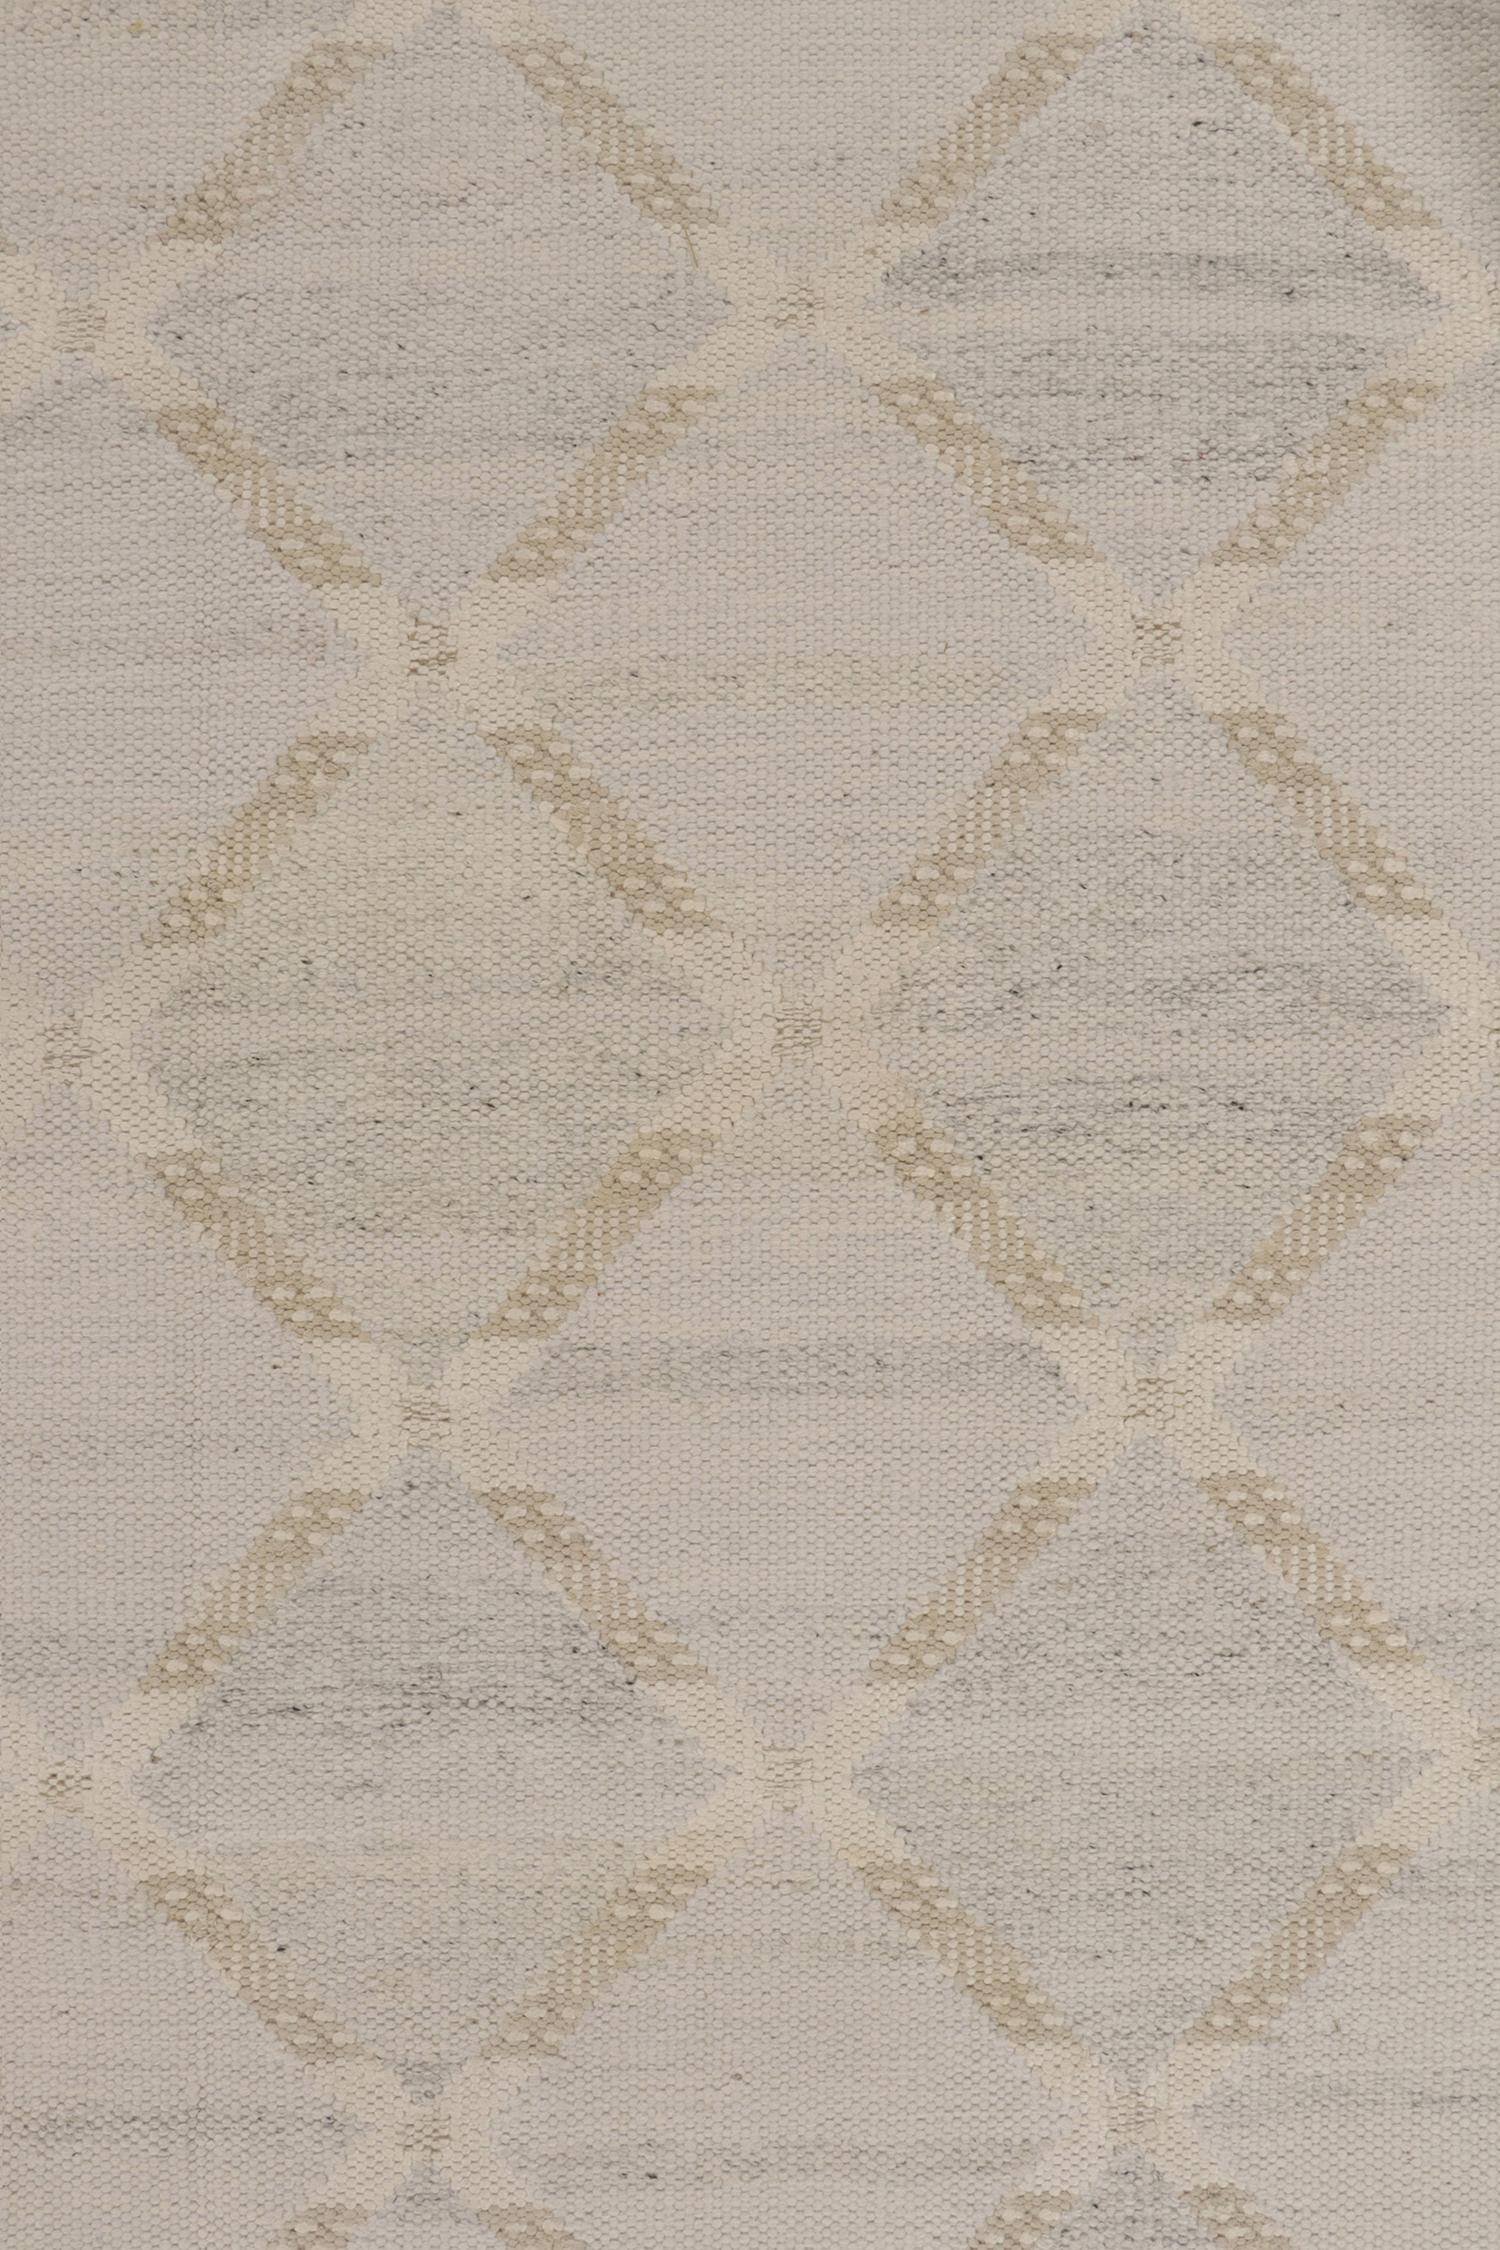 Rug & Kilim’s Scandinavian Style Kilim in Blue, Beige and White Trellis Pattern In New Condition For Sale In Long Island City, NY